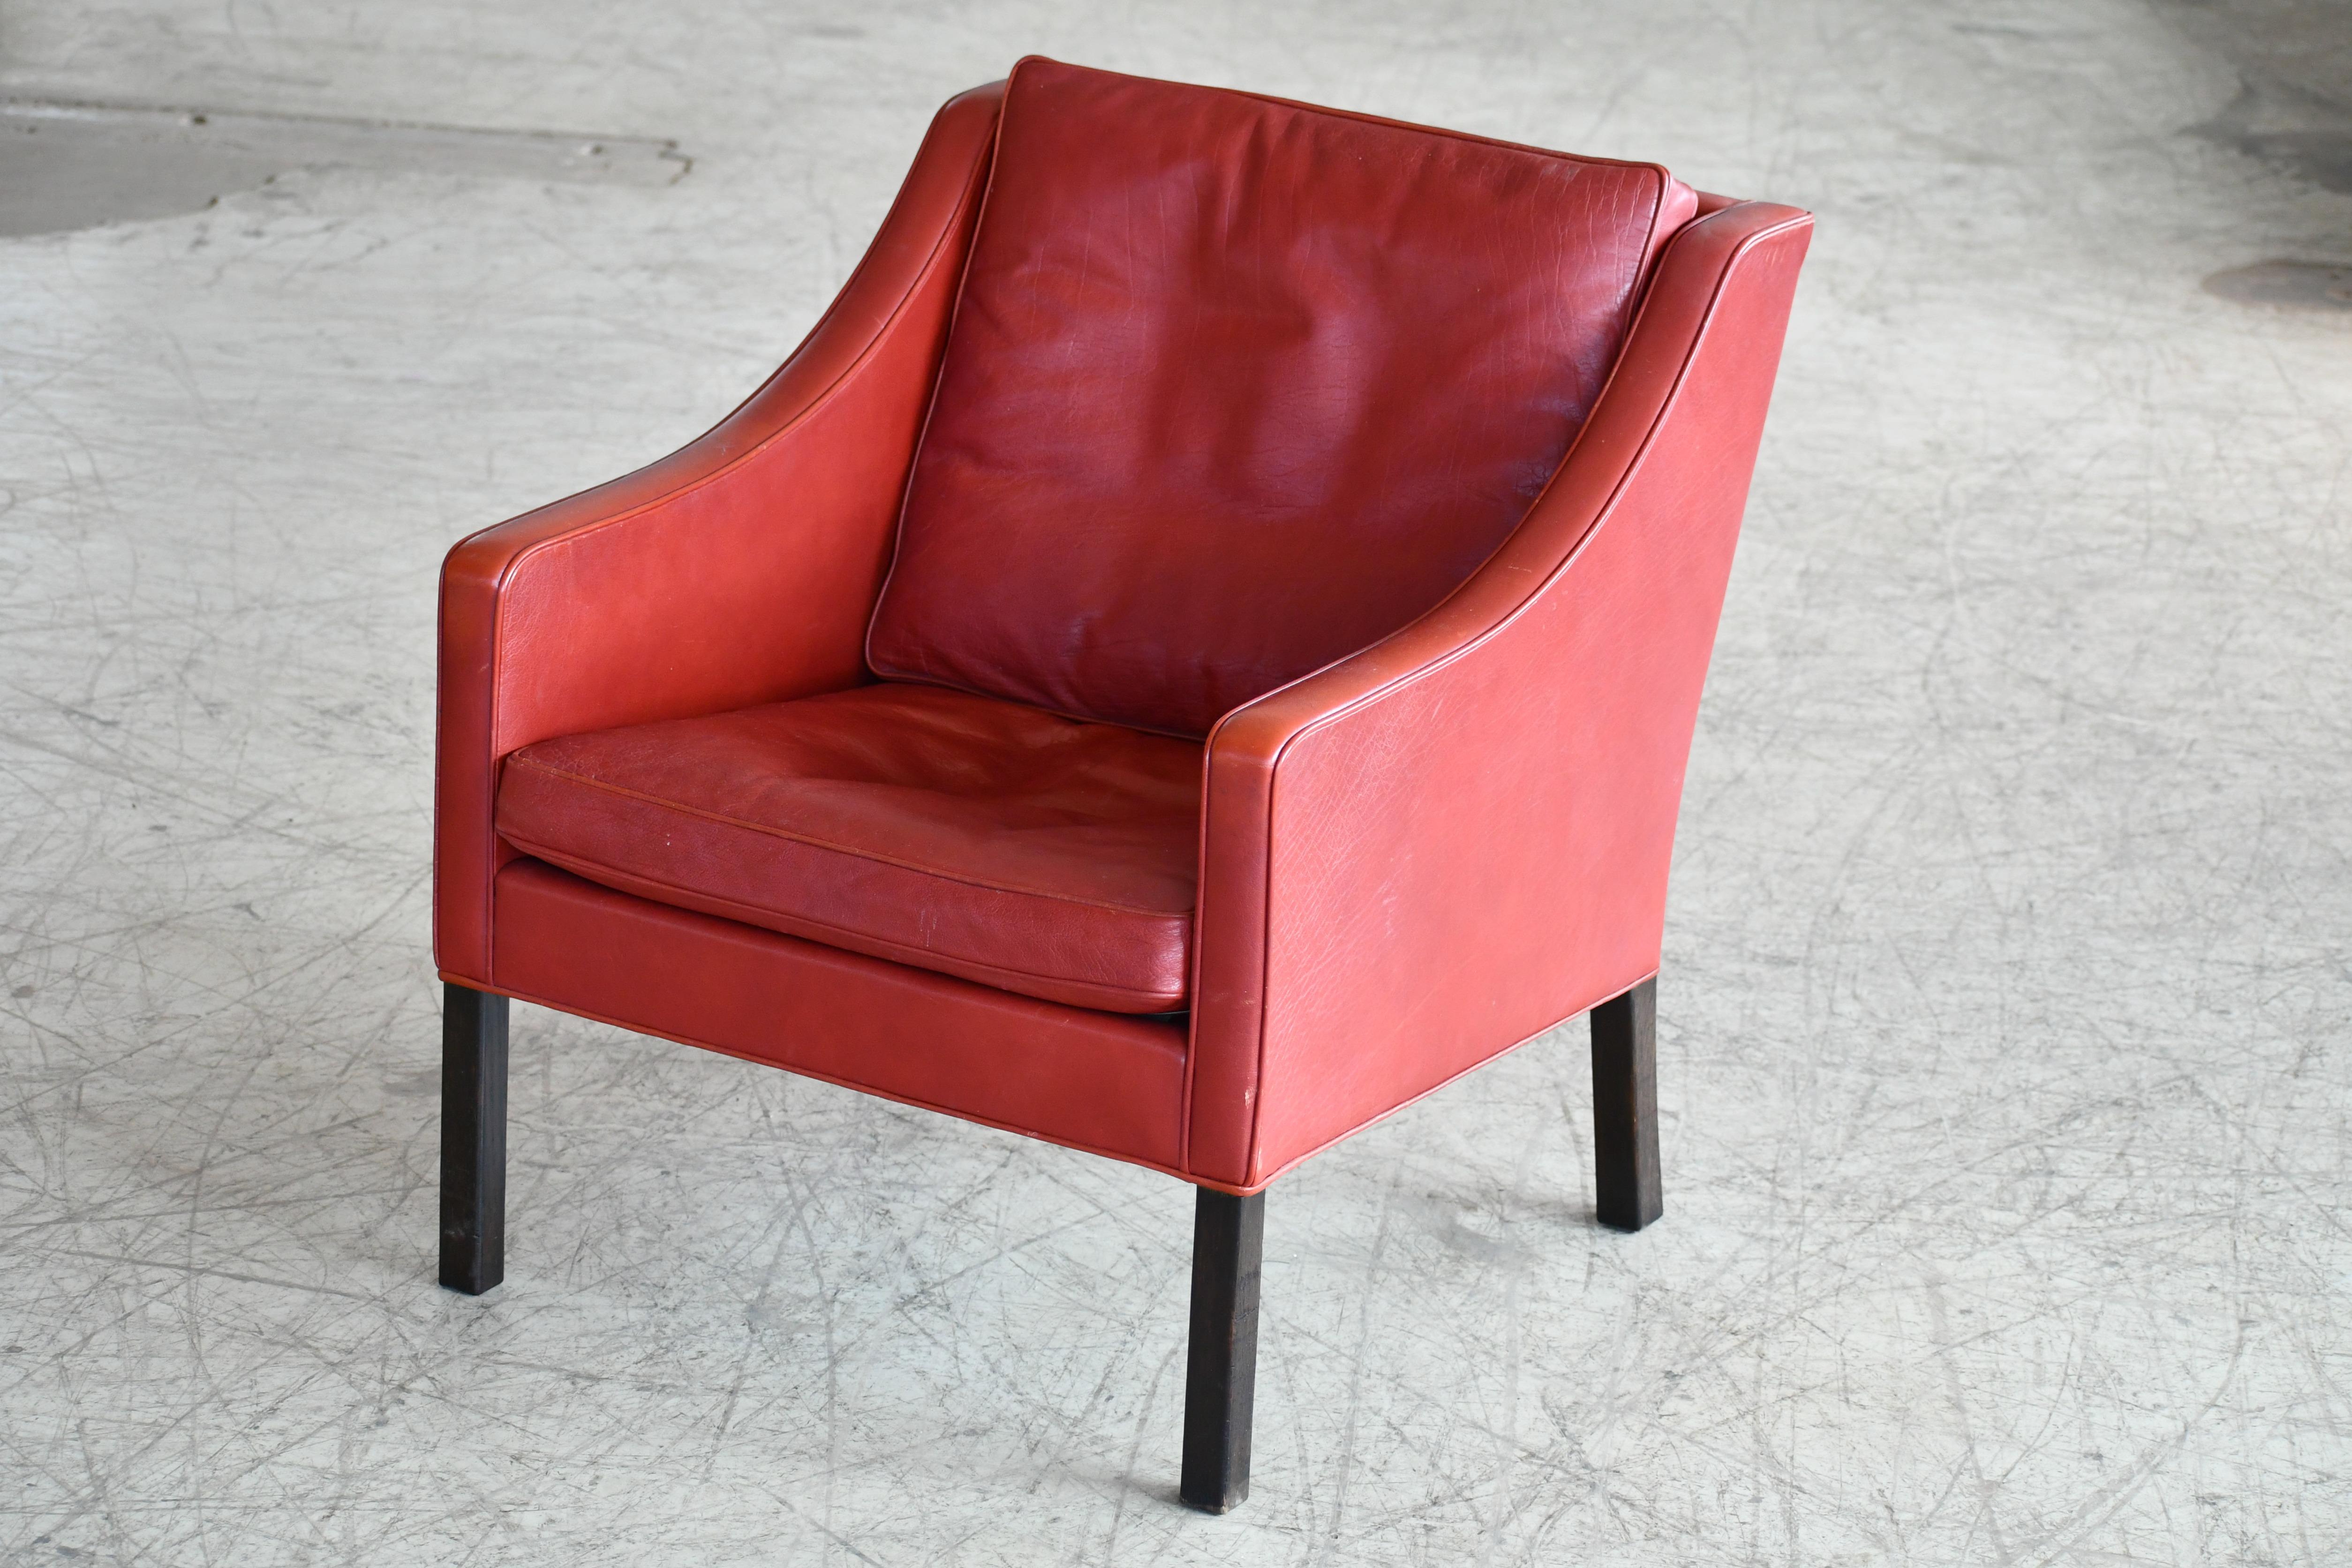 Mid-20th Century Børge Mogensen Lounge Chair Model 2421 in Down Filled Red Leather